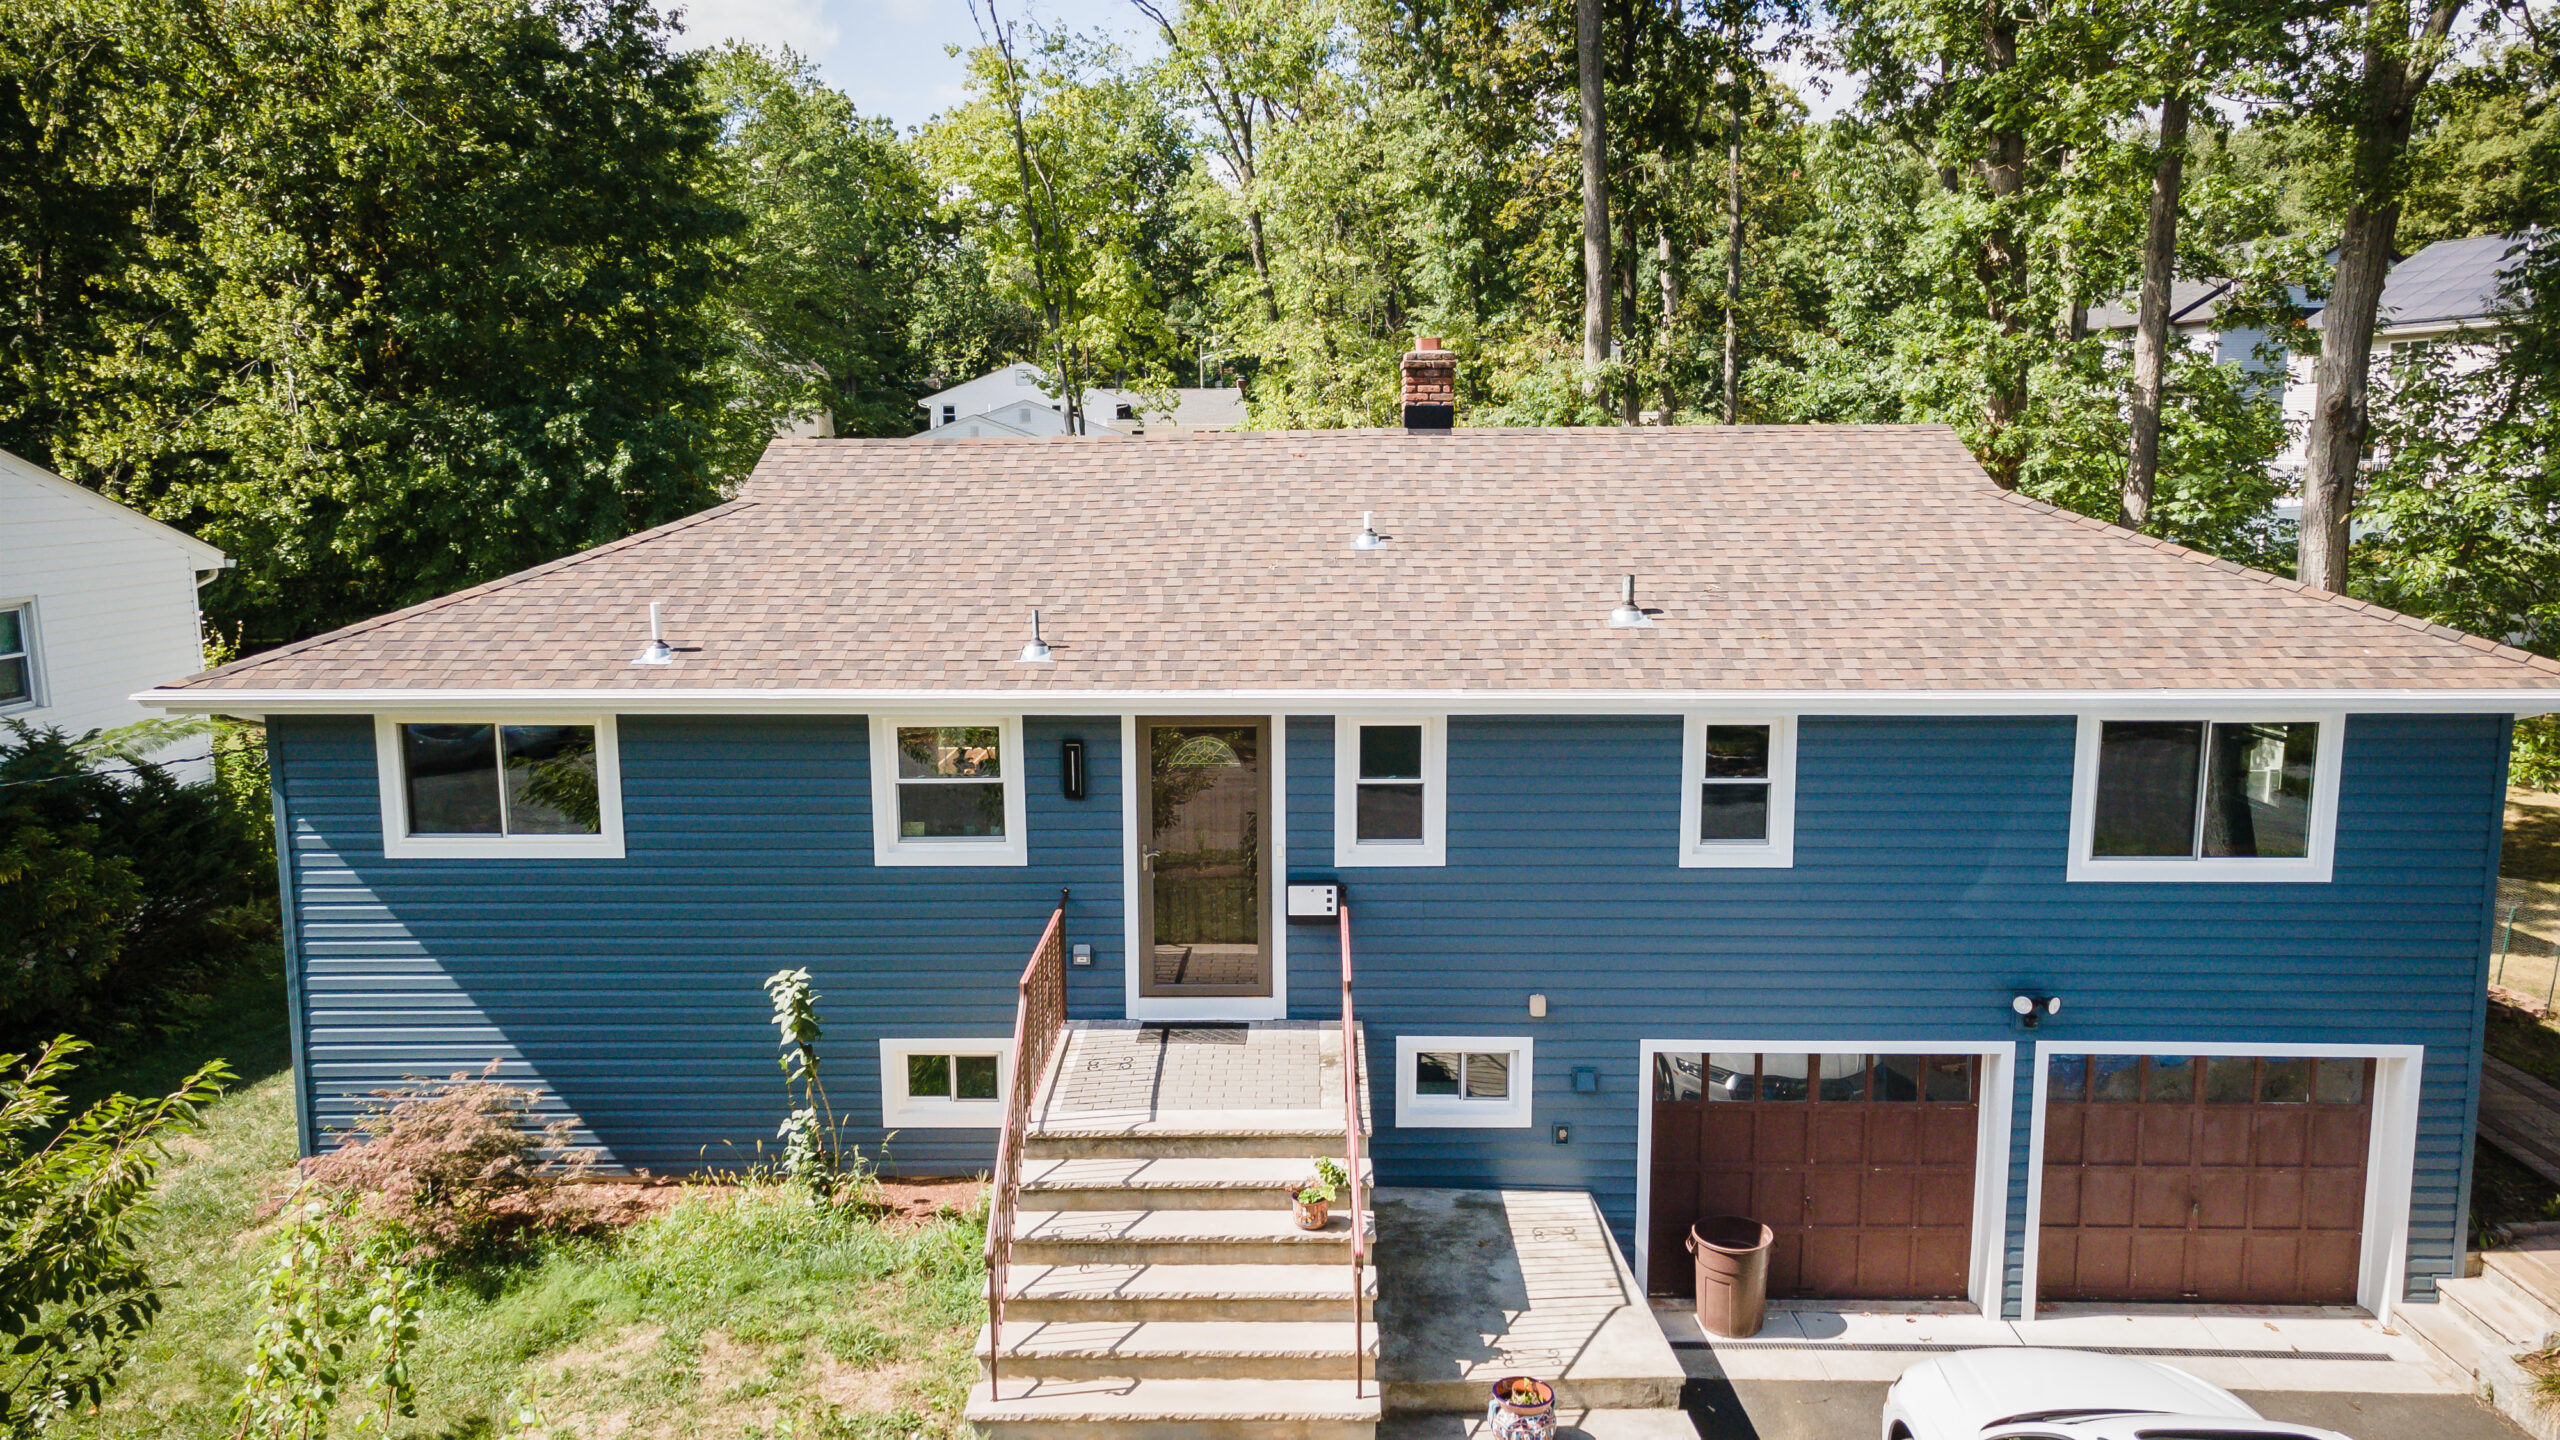 An aerial view of a blue house with a garage.